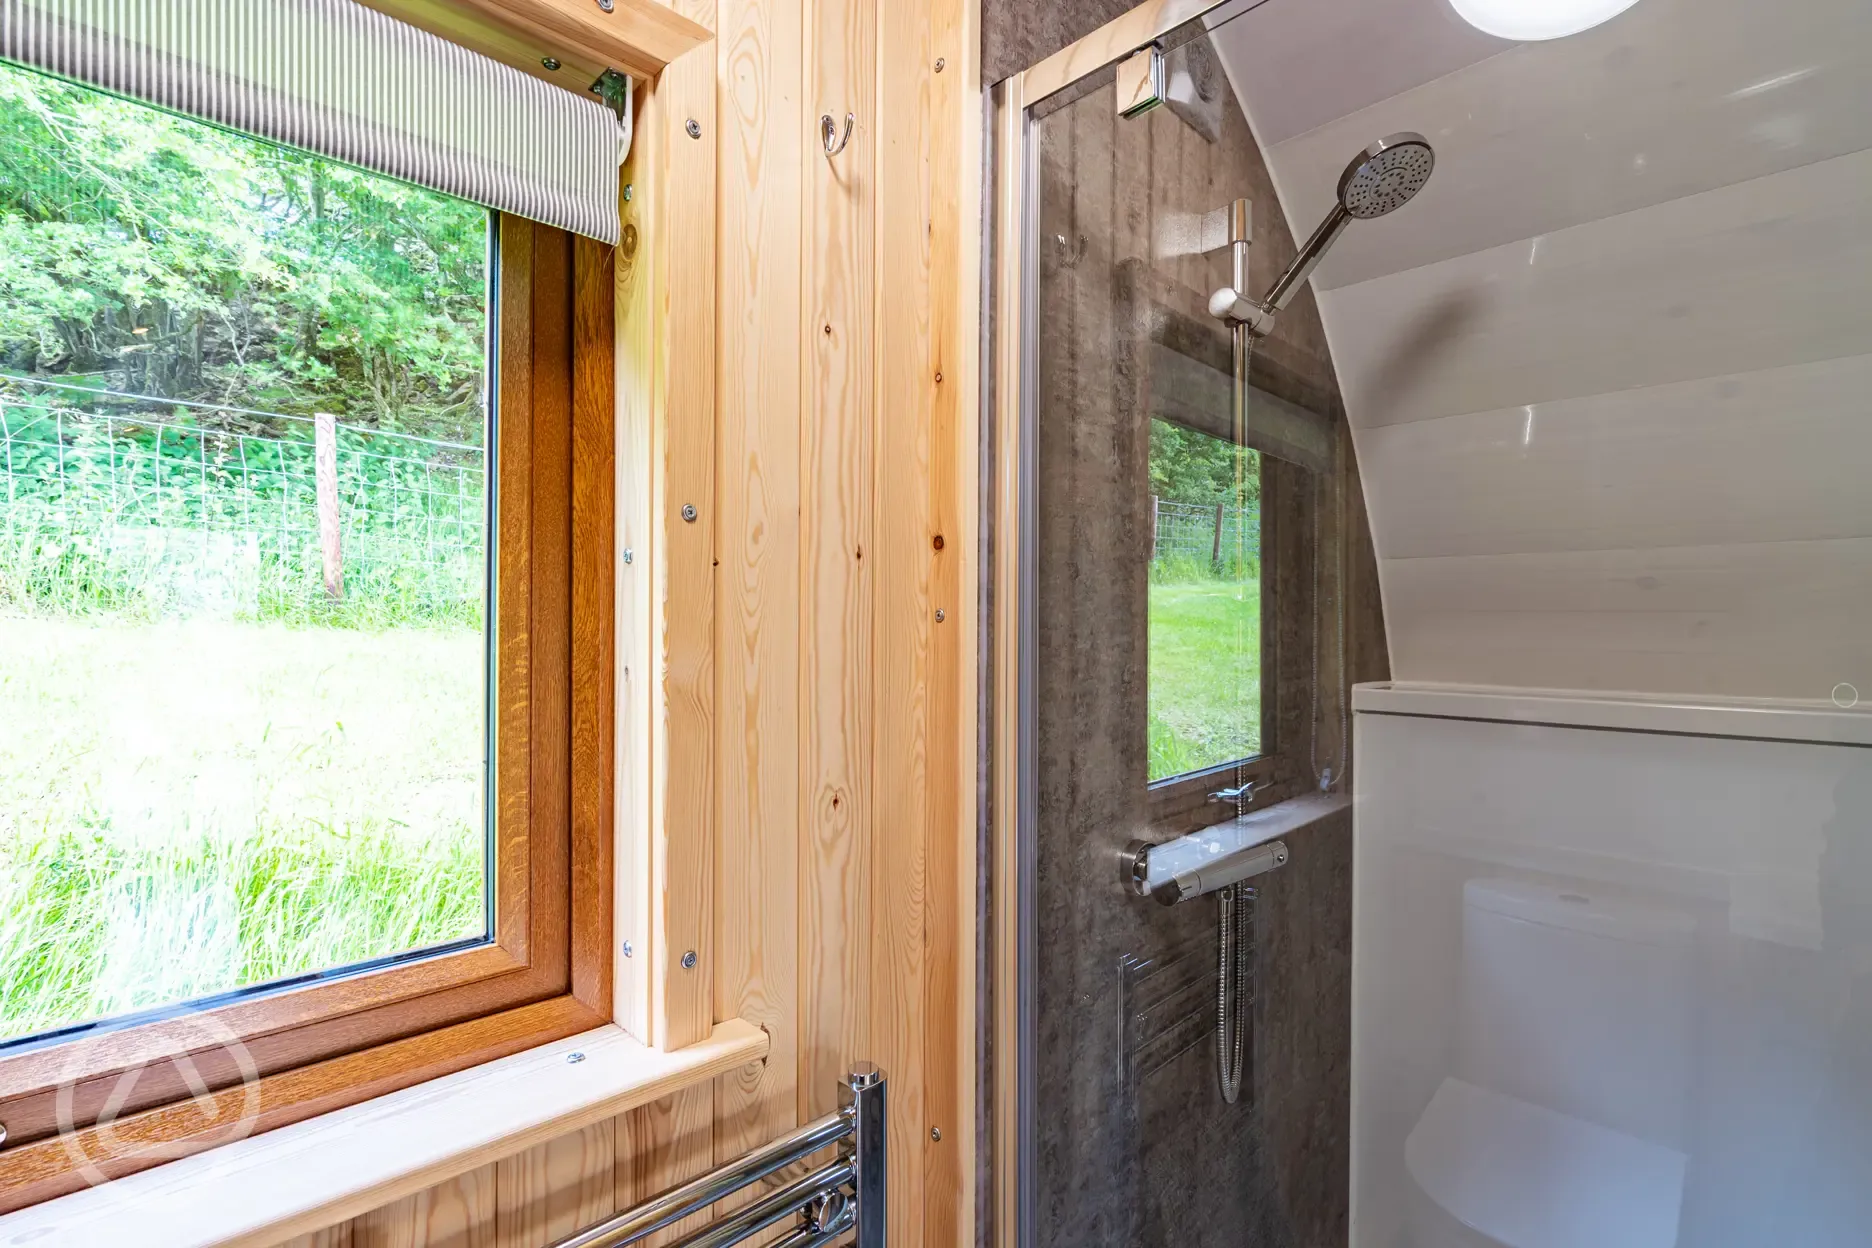 Camping pod with bunk beds shower